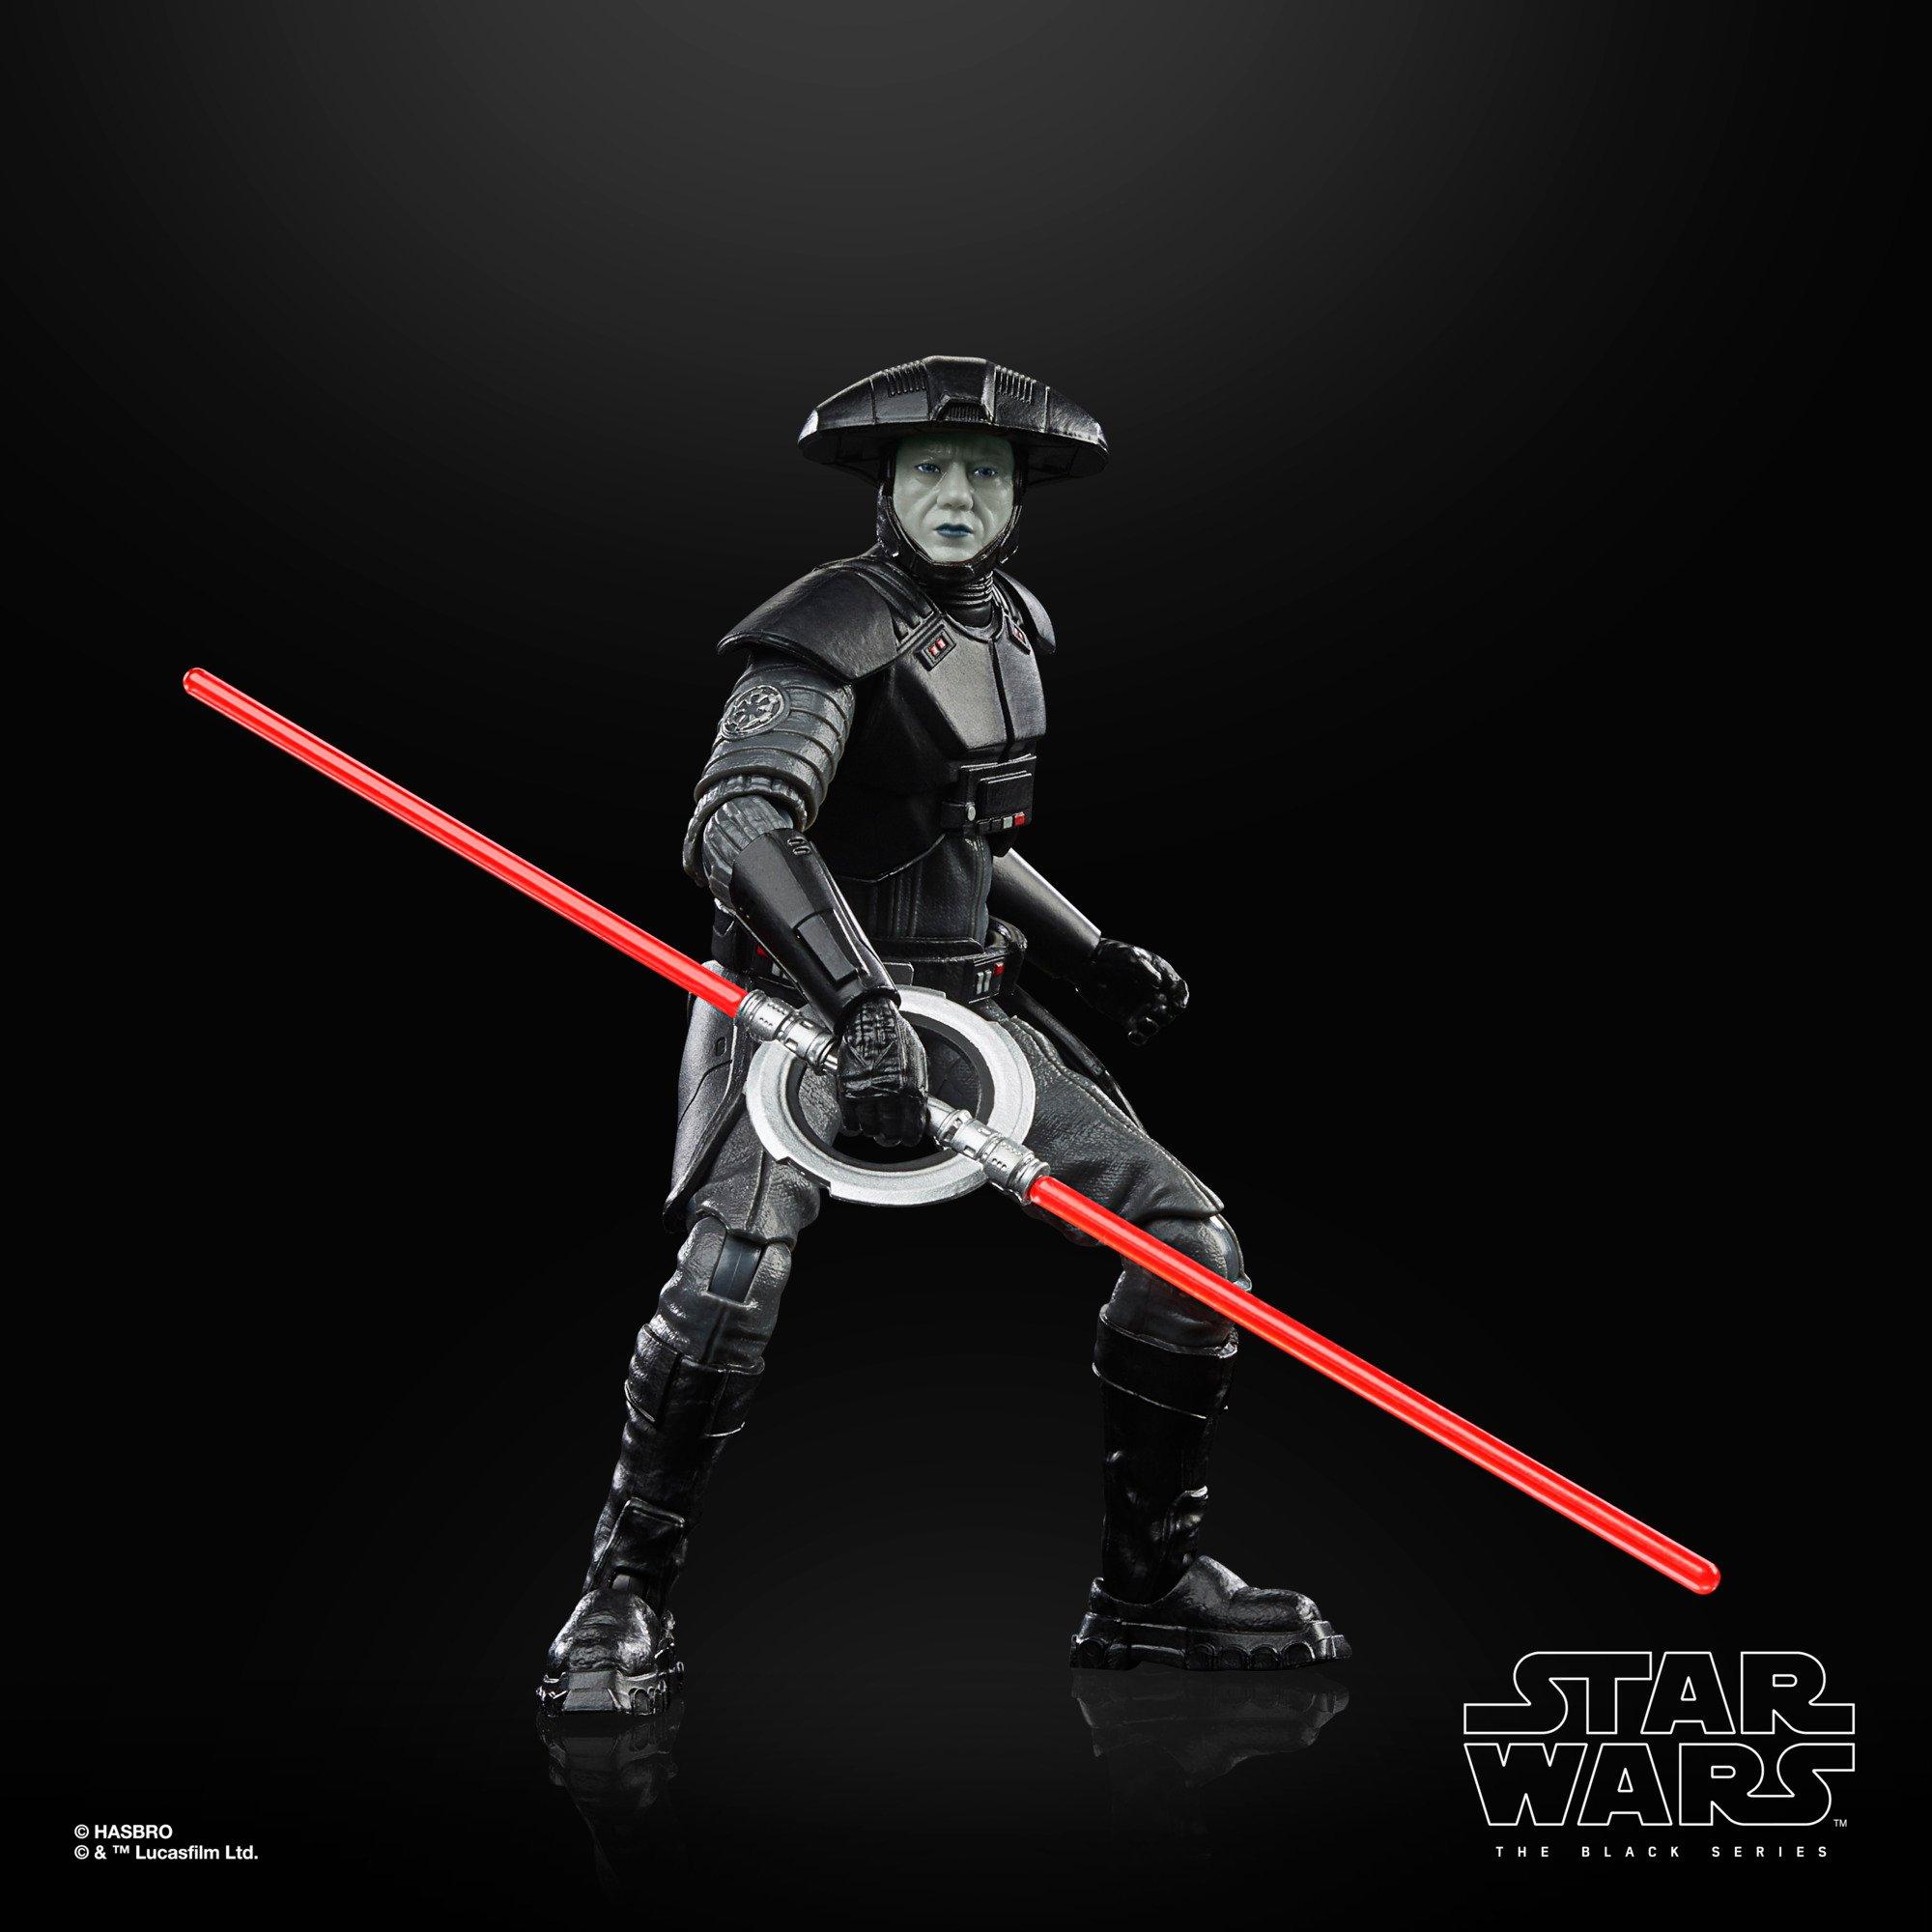 Star Wars Heroes & Villains Across The Galaxy 6 Action Figure Set